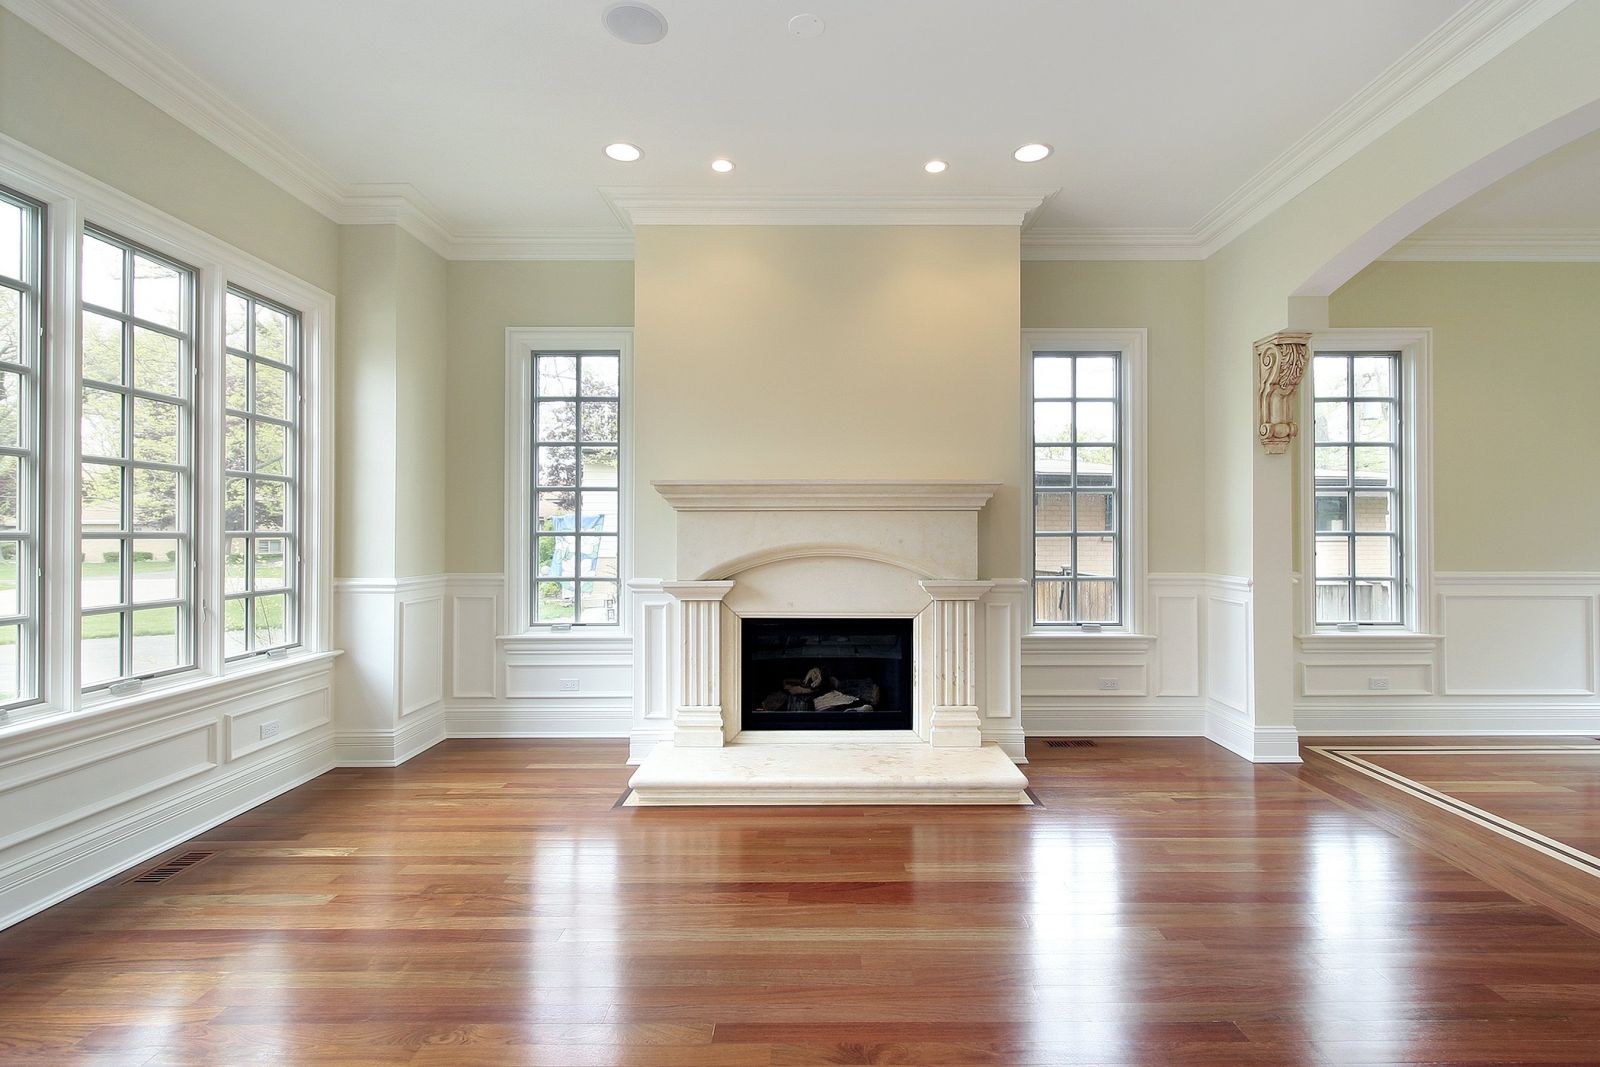 colonial moulding around windows and fireplace